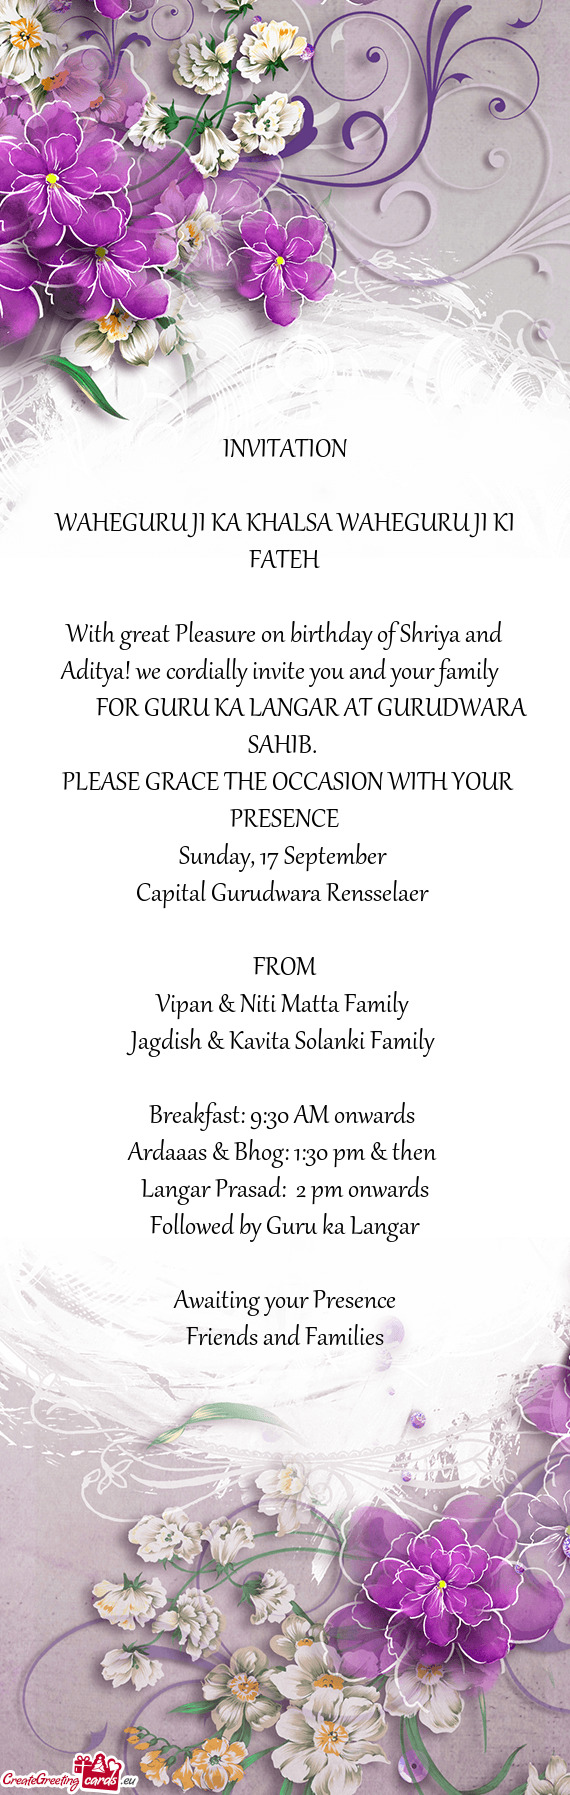 With great Pleasure on birthday of Shriya and Aditya! we cordially invite you and your family